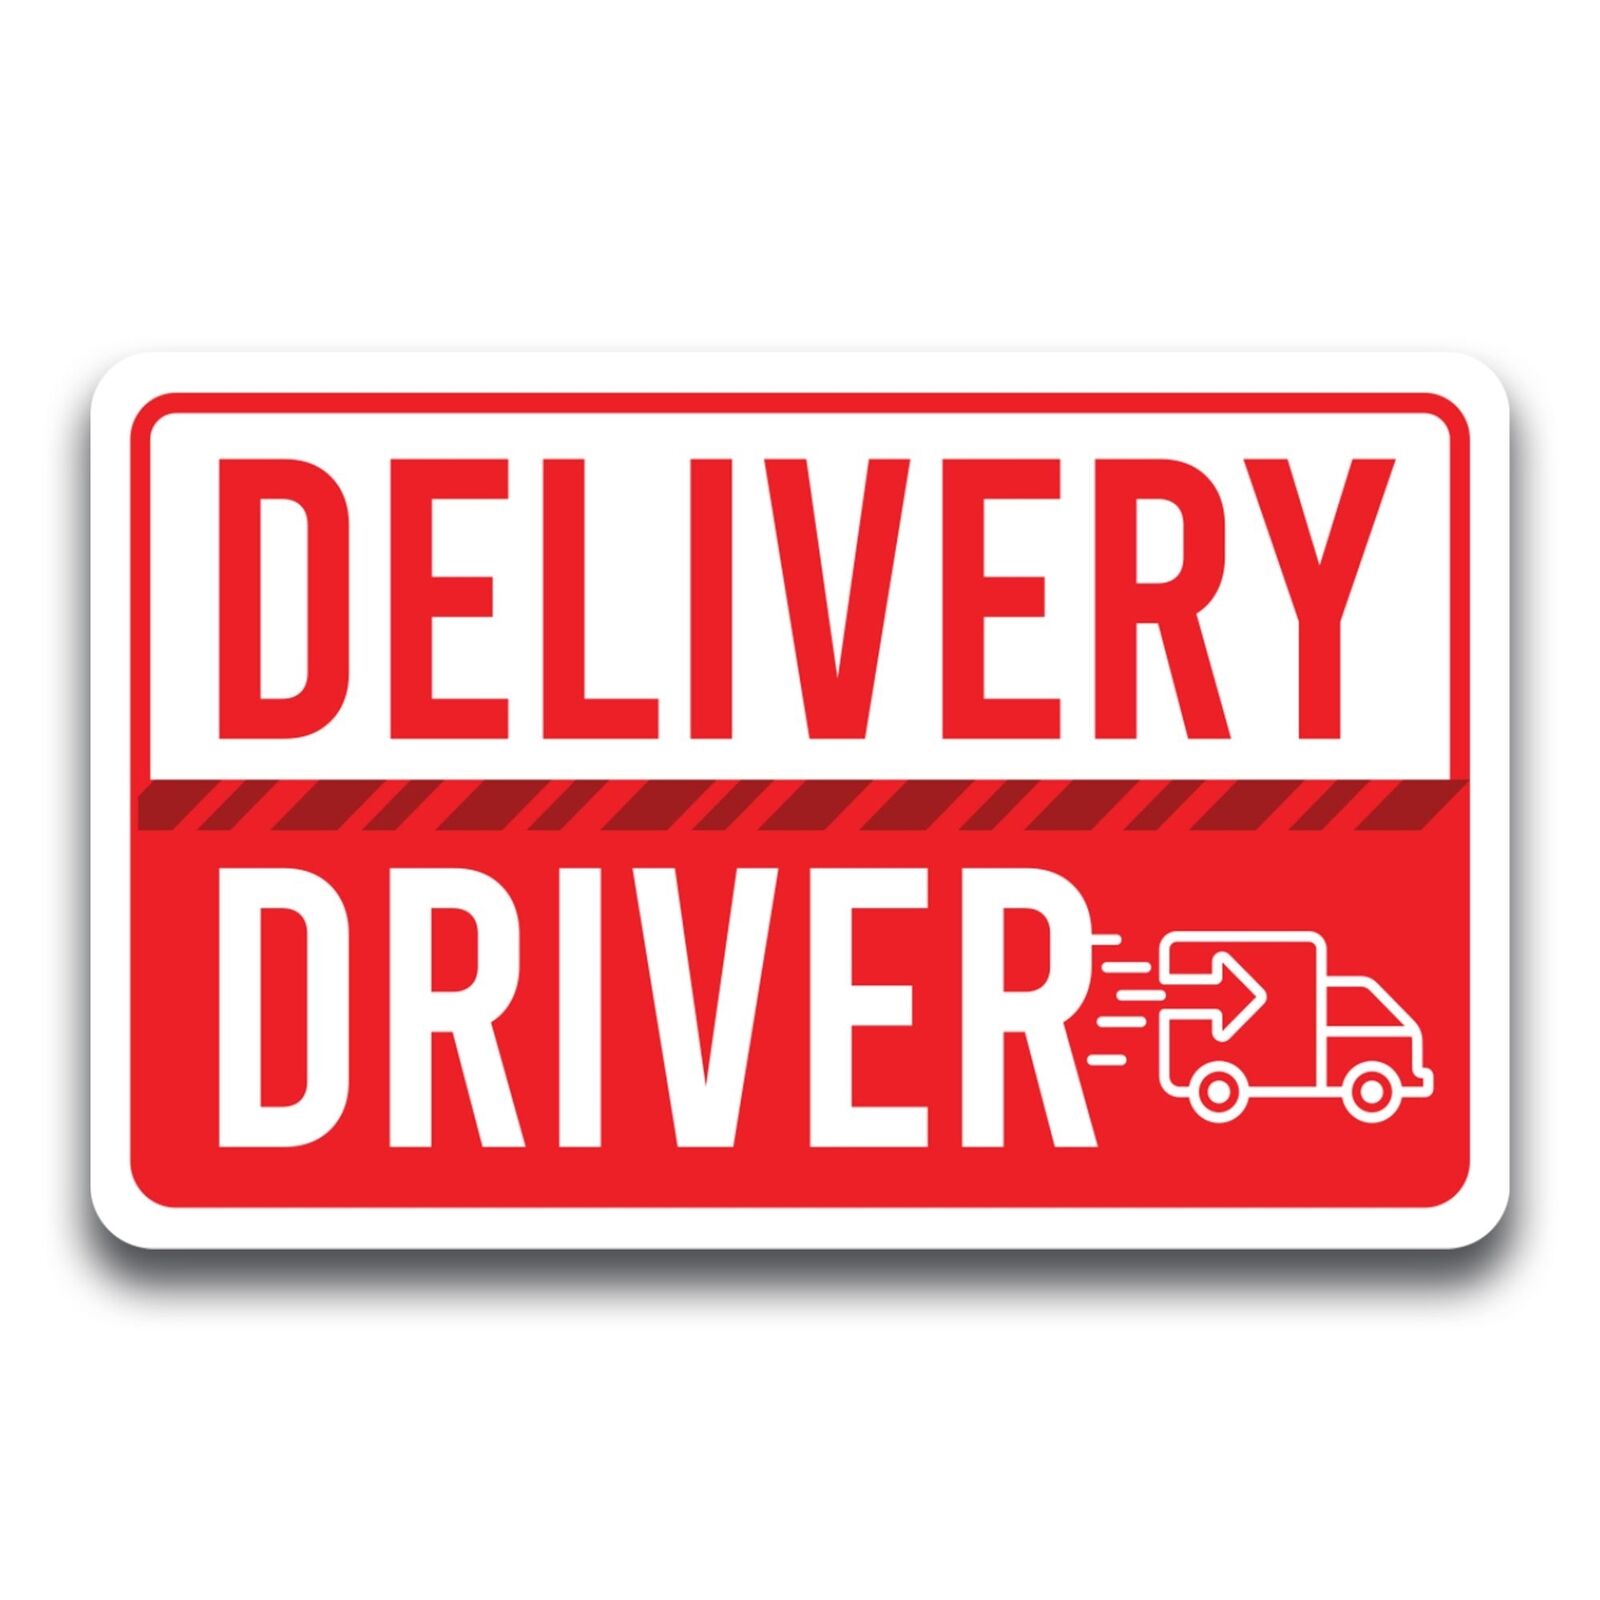 Magnet Me Up Red Delivery Driver Frequent Stops Magnet Decal, 5x8 inch, Delivery